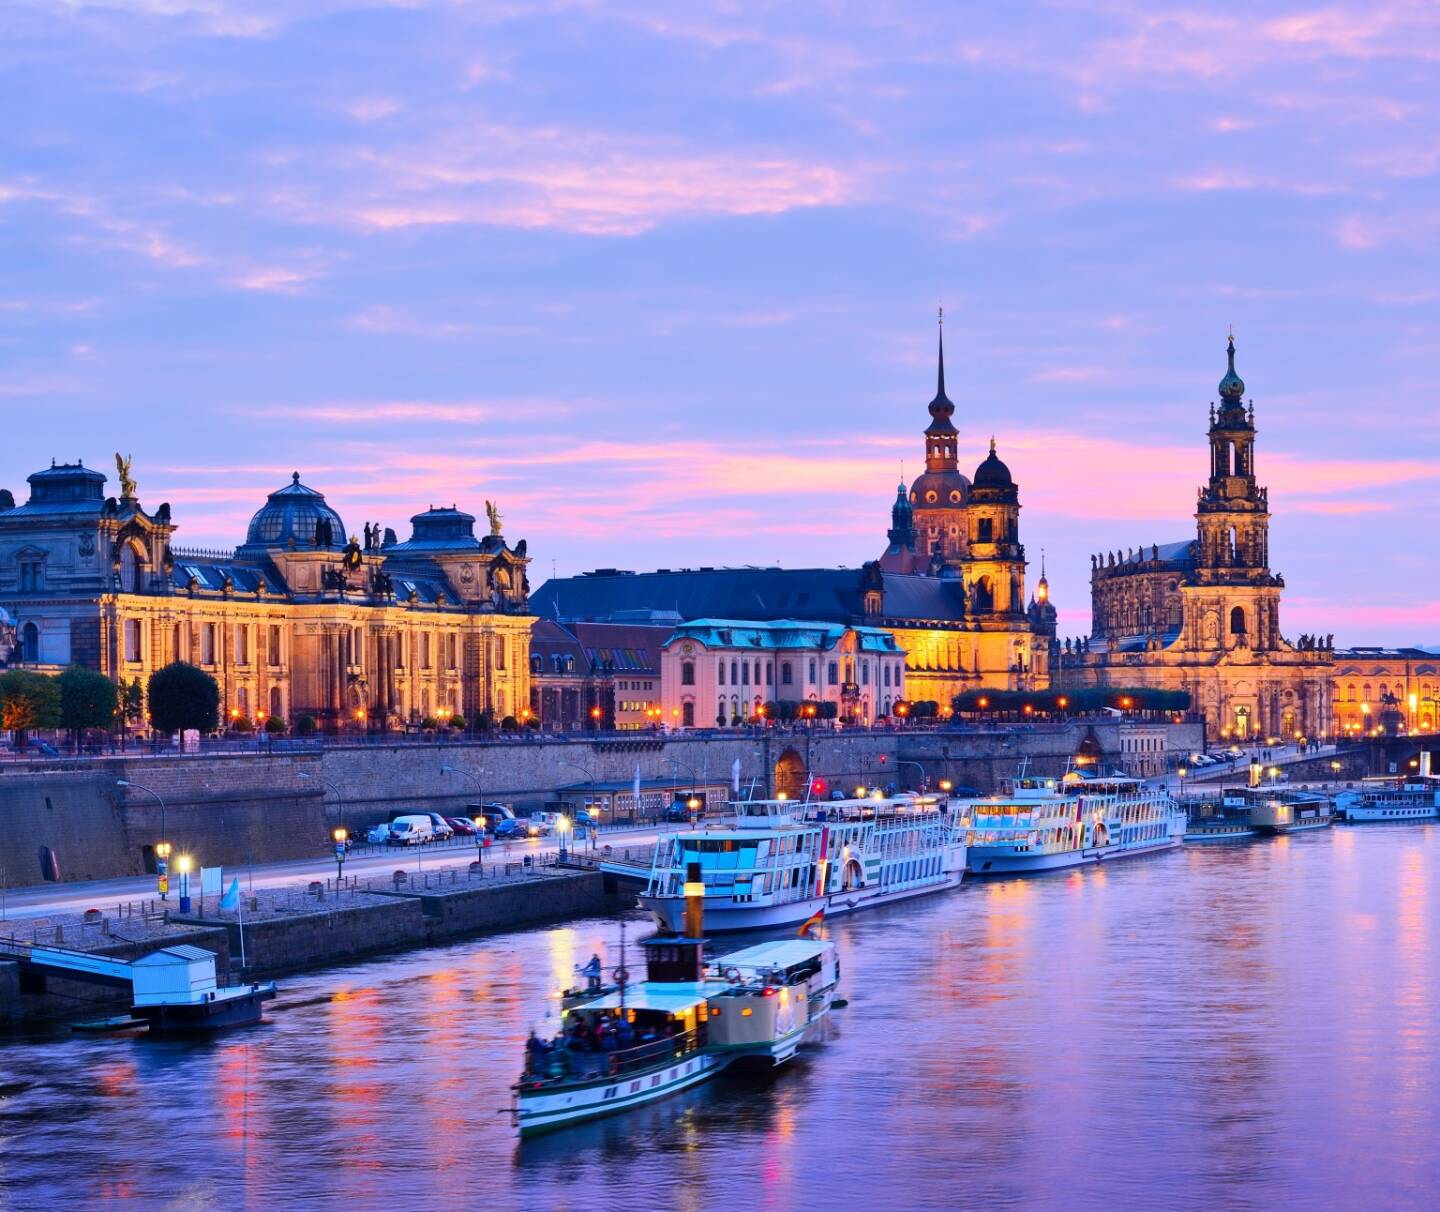 Dresden, Elbe, http://www.shutterstock.com/de/pic-156386465/stock-photo-dresden-germany-cityscape-over-the-elbe-river.html